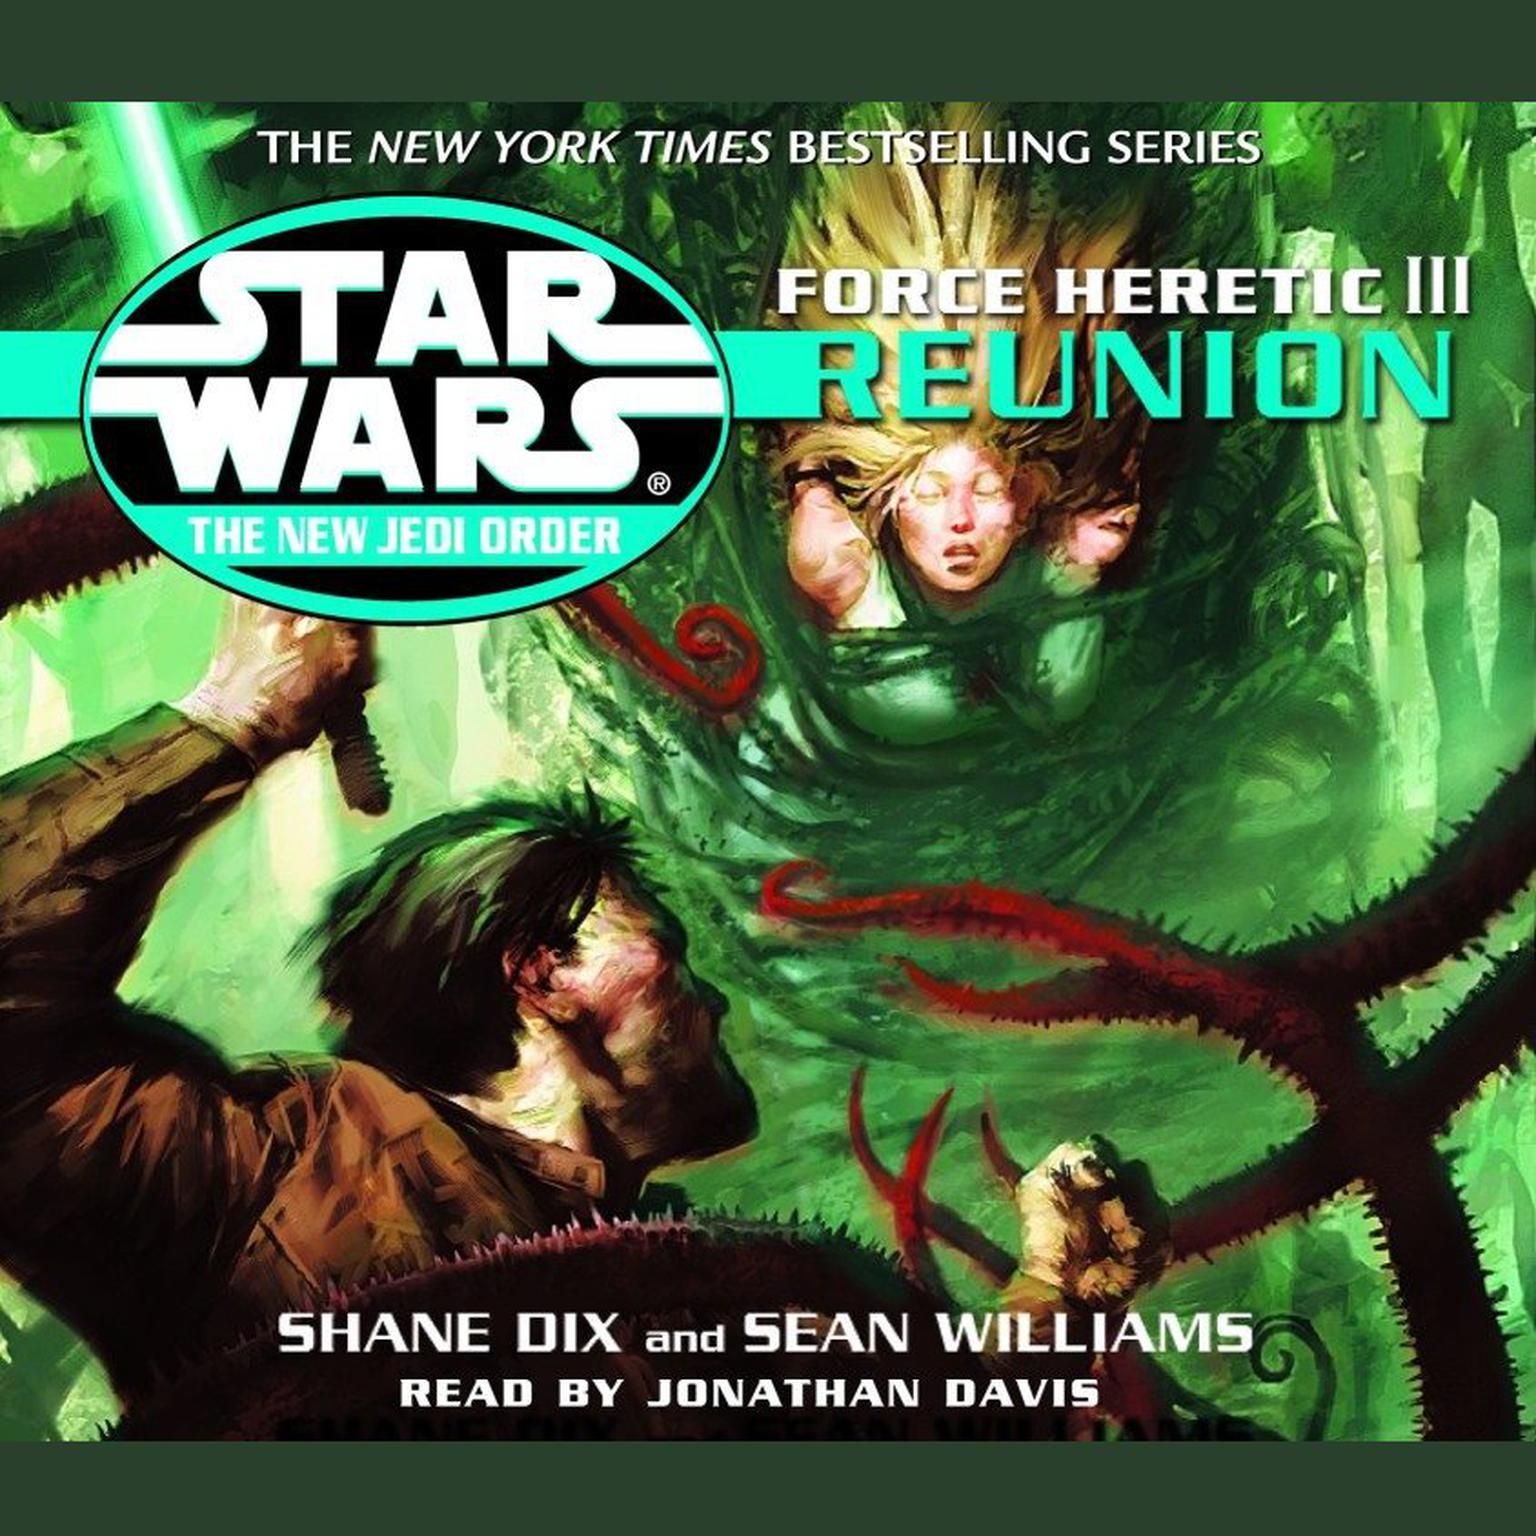 Star Wars: The New Jedi Order: Force Heretic III: Reunion (Abridged) Audiobook, by Sean Williams